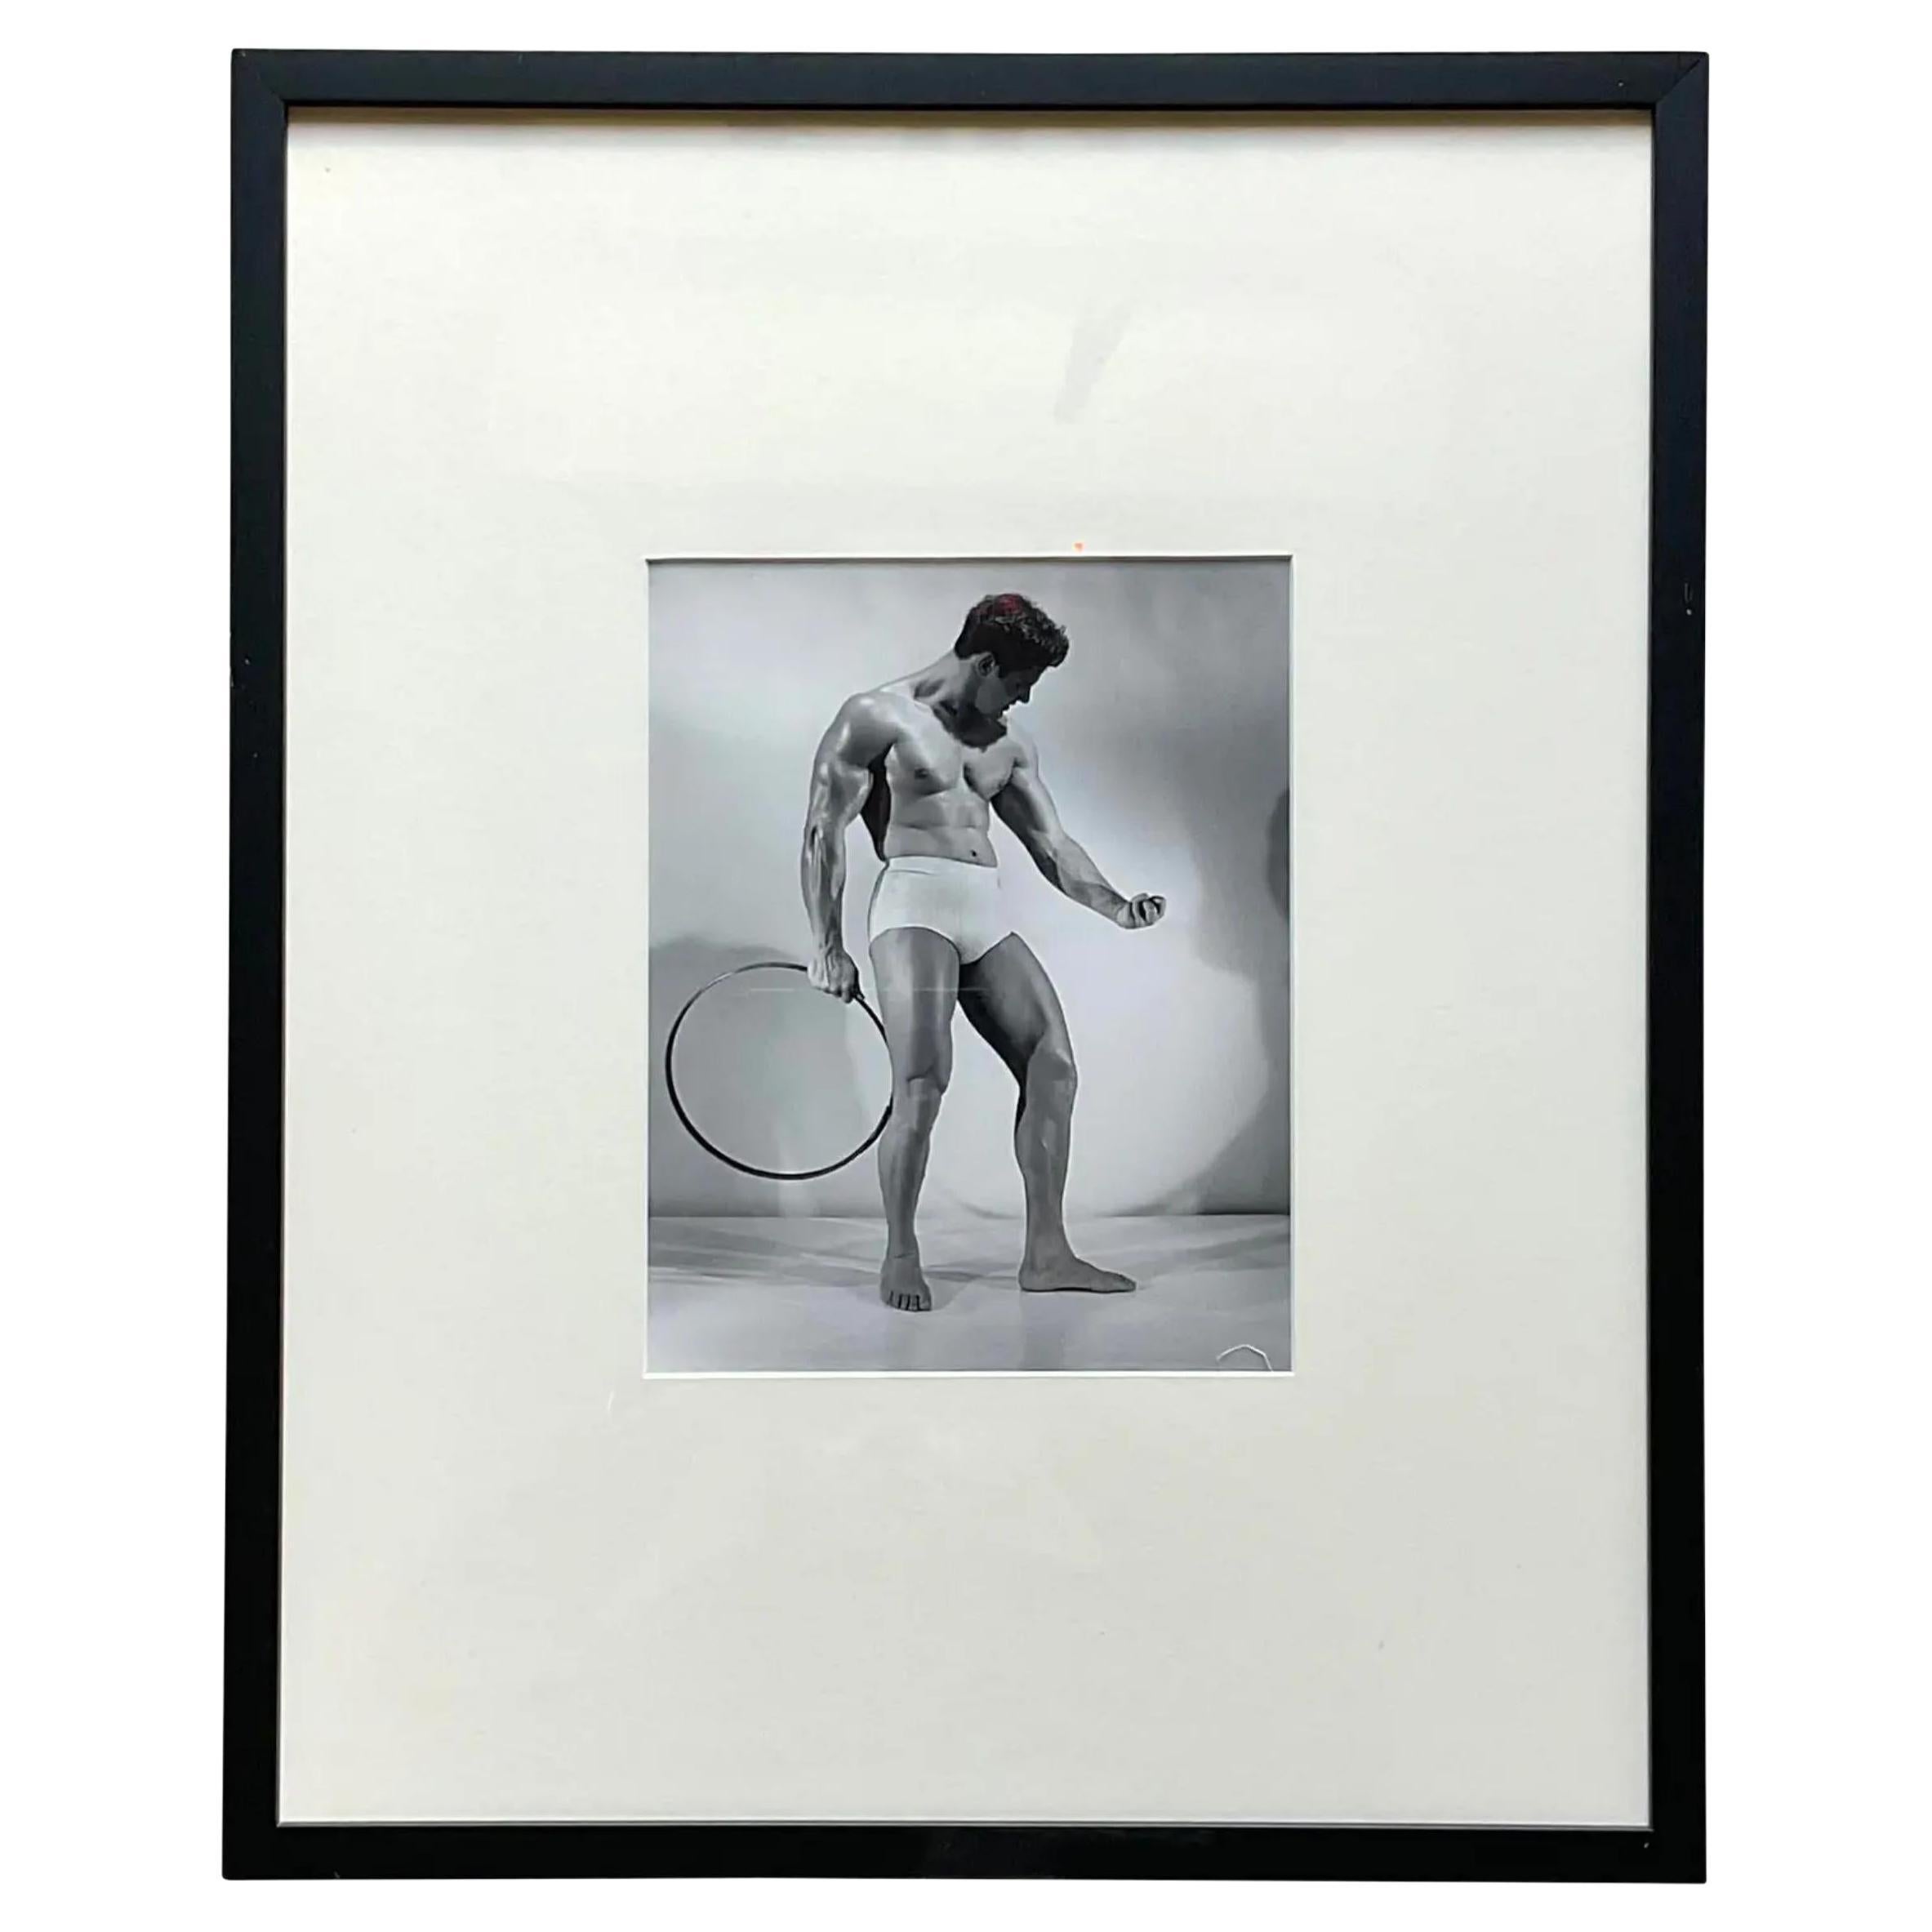 Mid 20th Century Vintage Bruce of La Vintage Framed Photograph on Man with Hoop